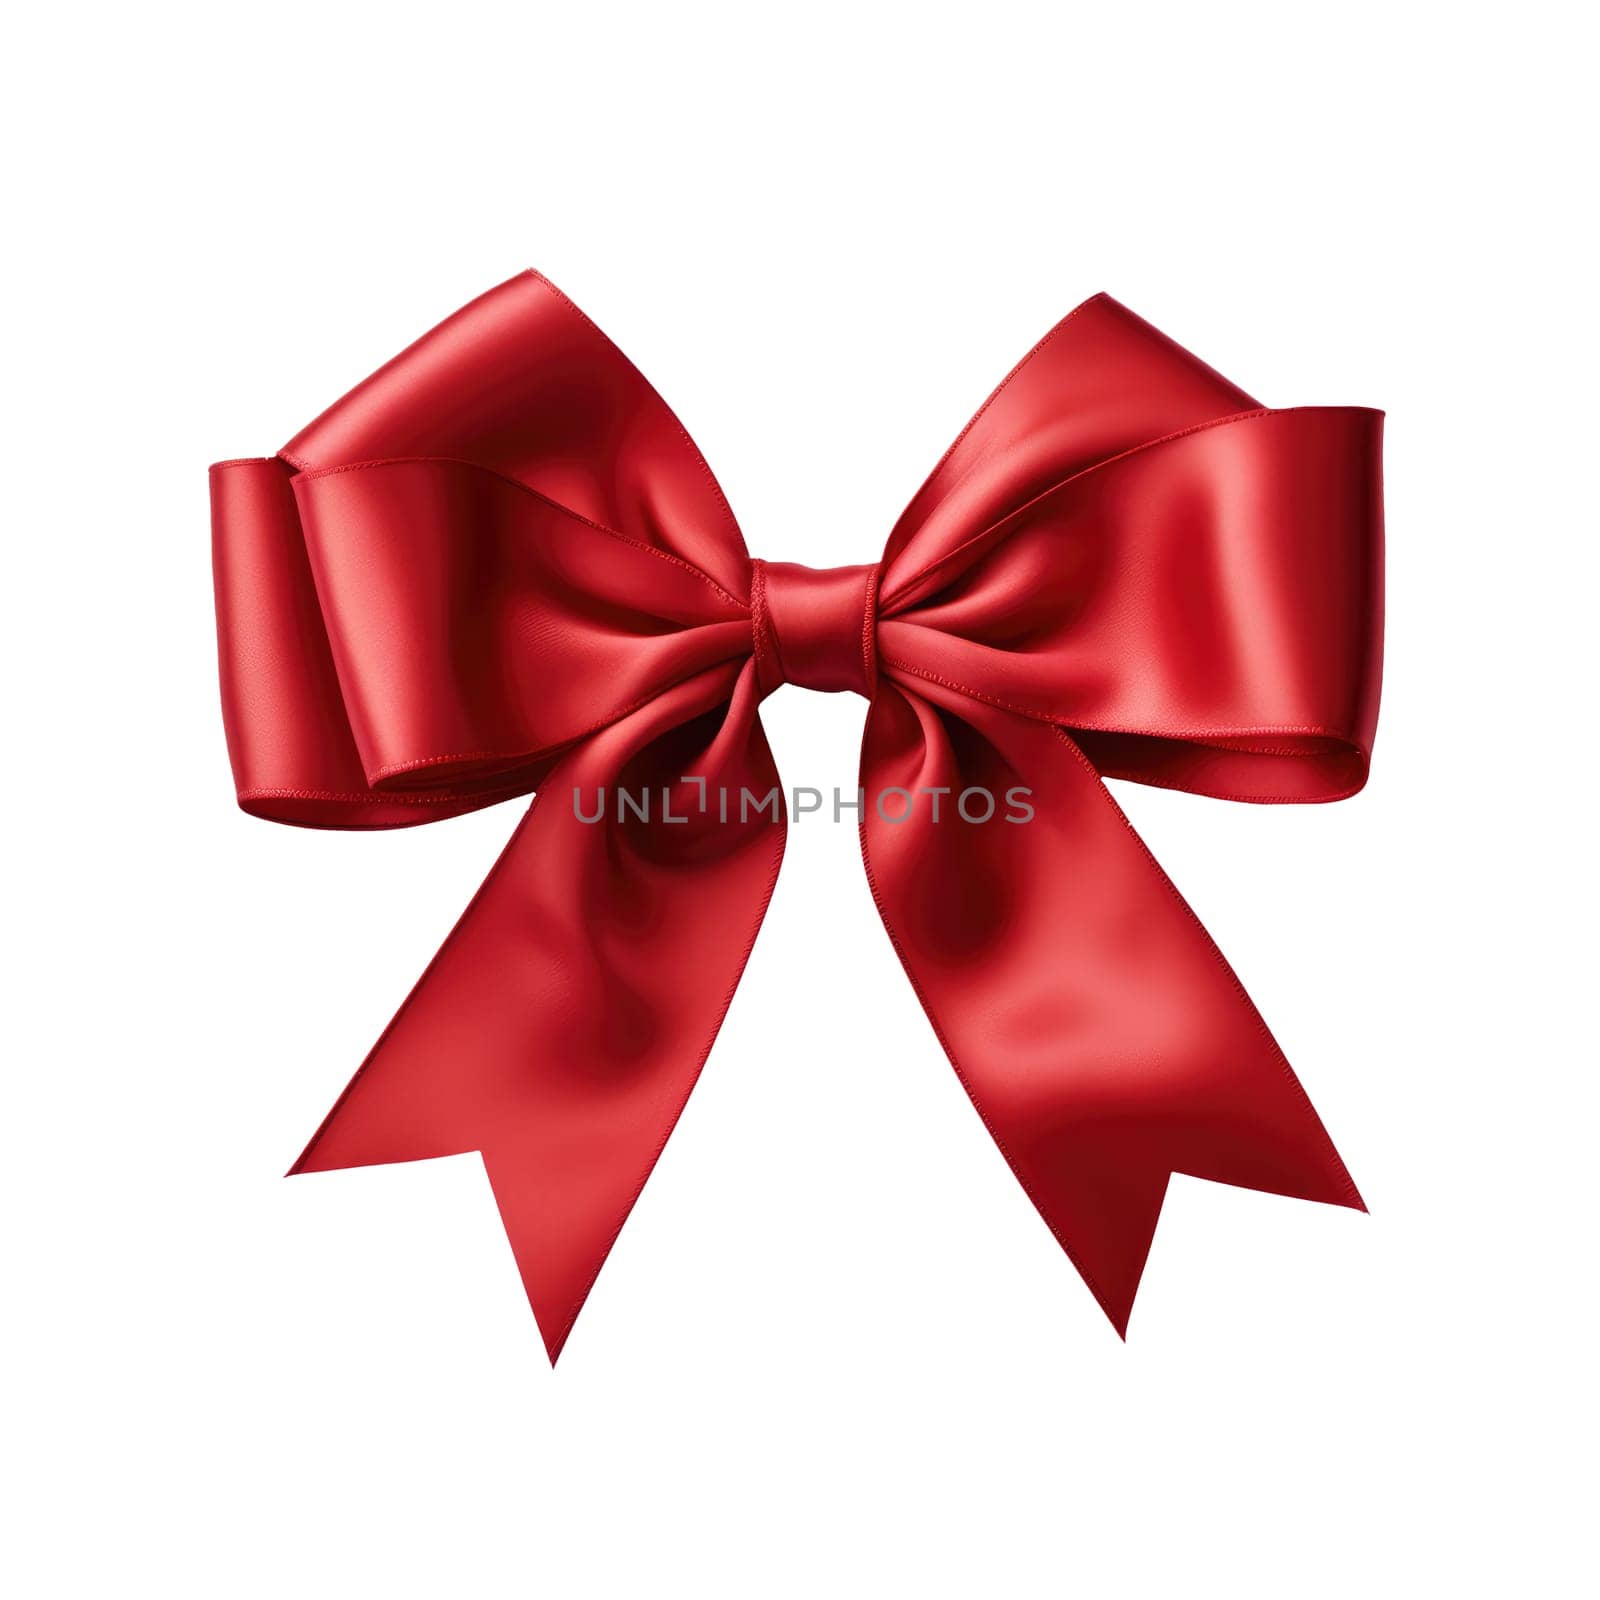 Red ribbon bow isolated on white background by natali_brill